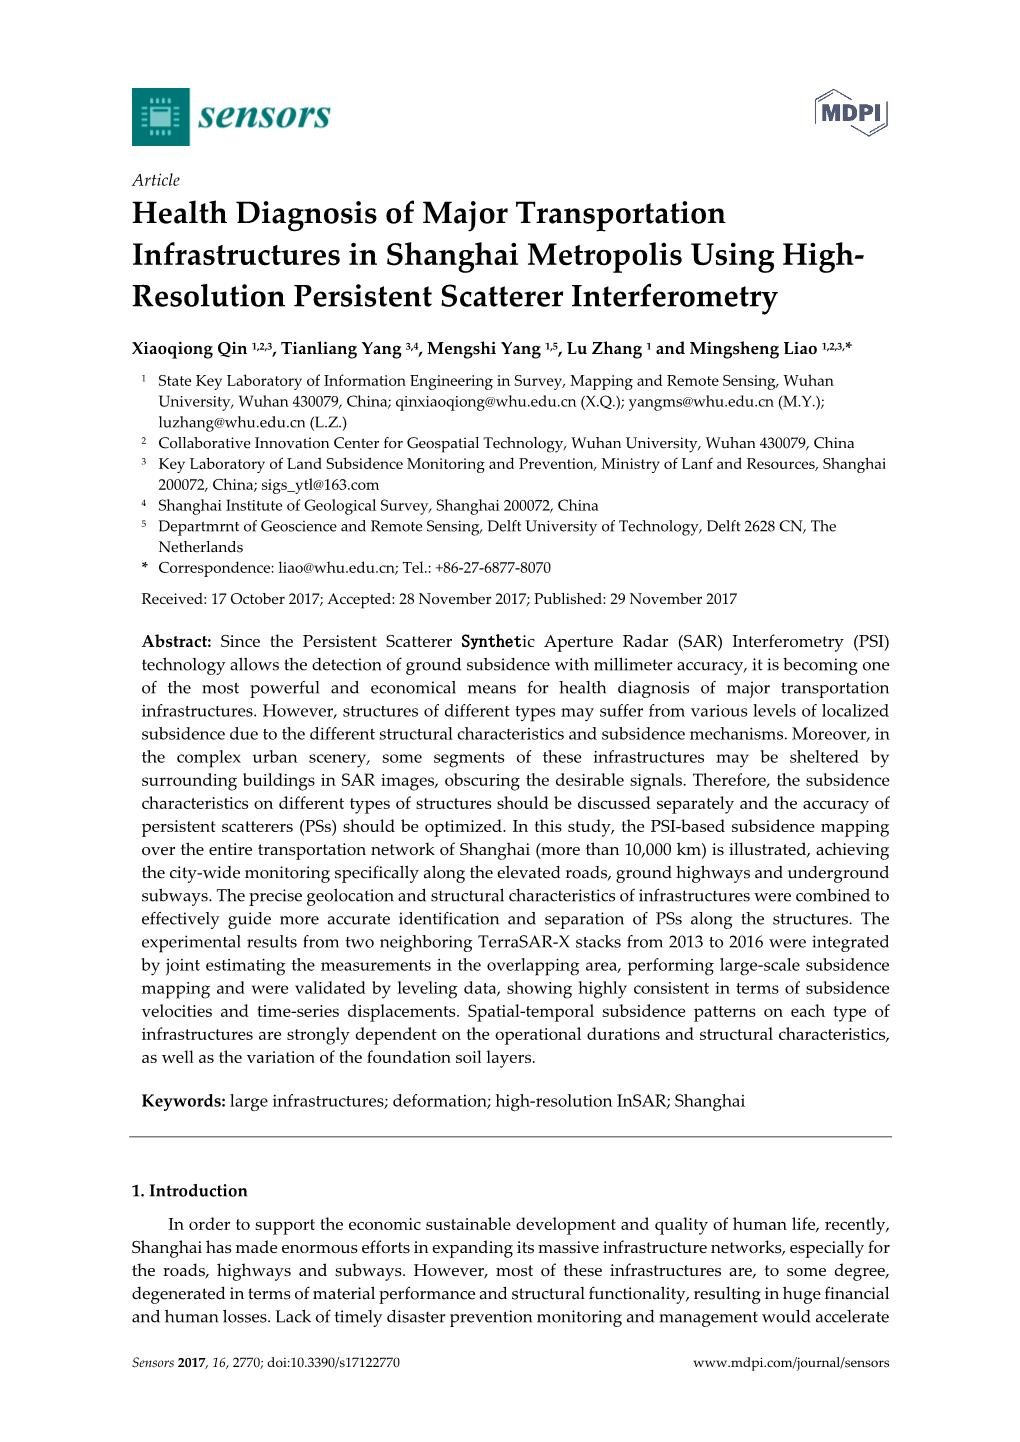 Health Diagnosis of Major Transportation Infrastructures in Shanghai Metropolis Using High- Resolution Persistent Scatterer Interferometry